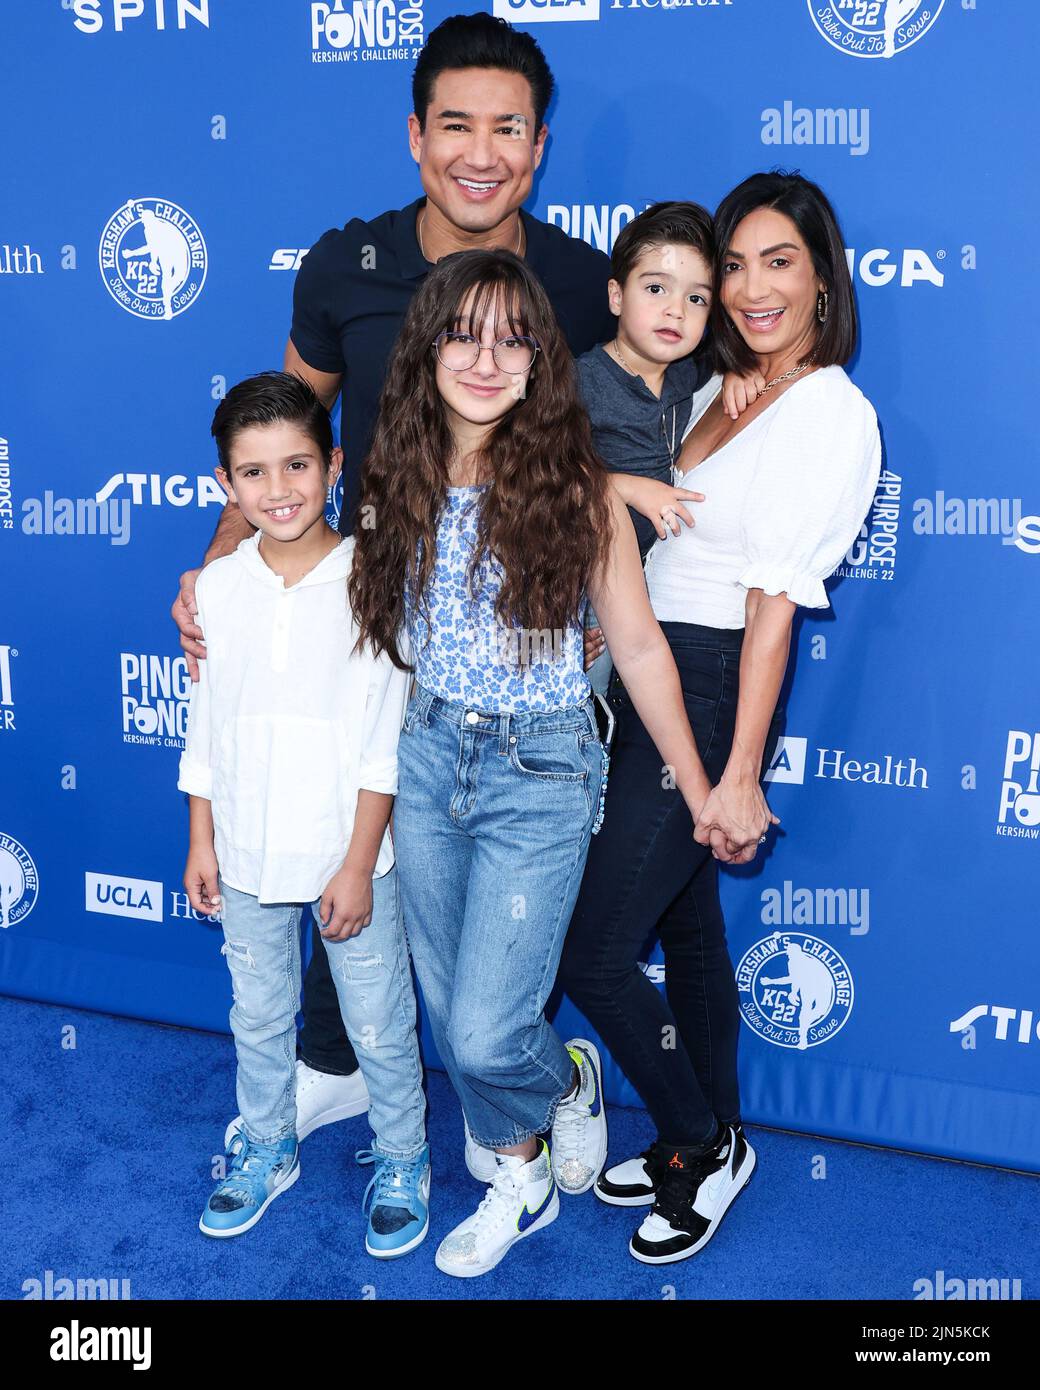 ELYSIAN PARK, LOS ANGELES, CALIFORNIA, USA - AUGUST 08: American actor and television host Mario Lopez, wife/American actress Courtney Laine Mazza, daughter Gia Francesca Lopez, son Santino Rafael Lopez and son Dominic Lopez arrive at Kershaw's Challenge Ping Pong 4 Purpose 2022 held at Dodger Stadium on August 8, 2022 in Elysian Park, Los Angeles, California, United States. (Photo by Xavier Collin/Image Press Agency) Stock Photo